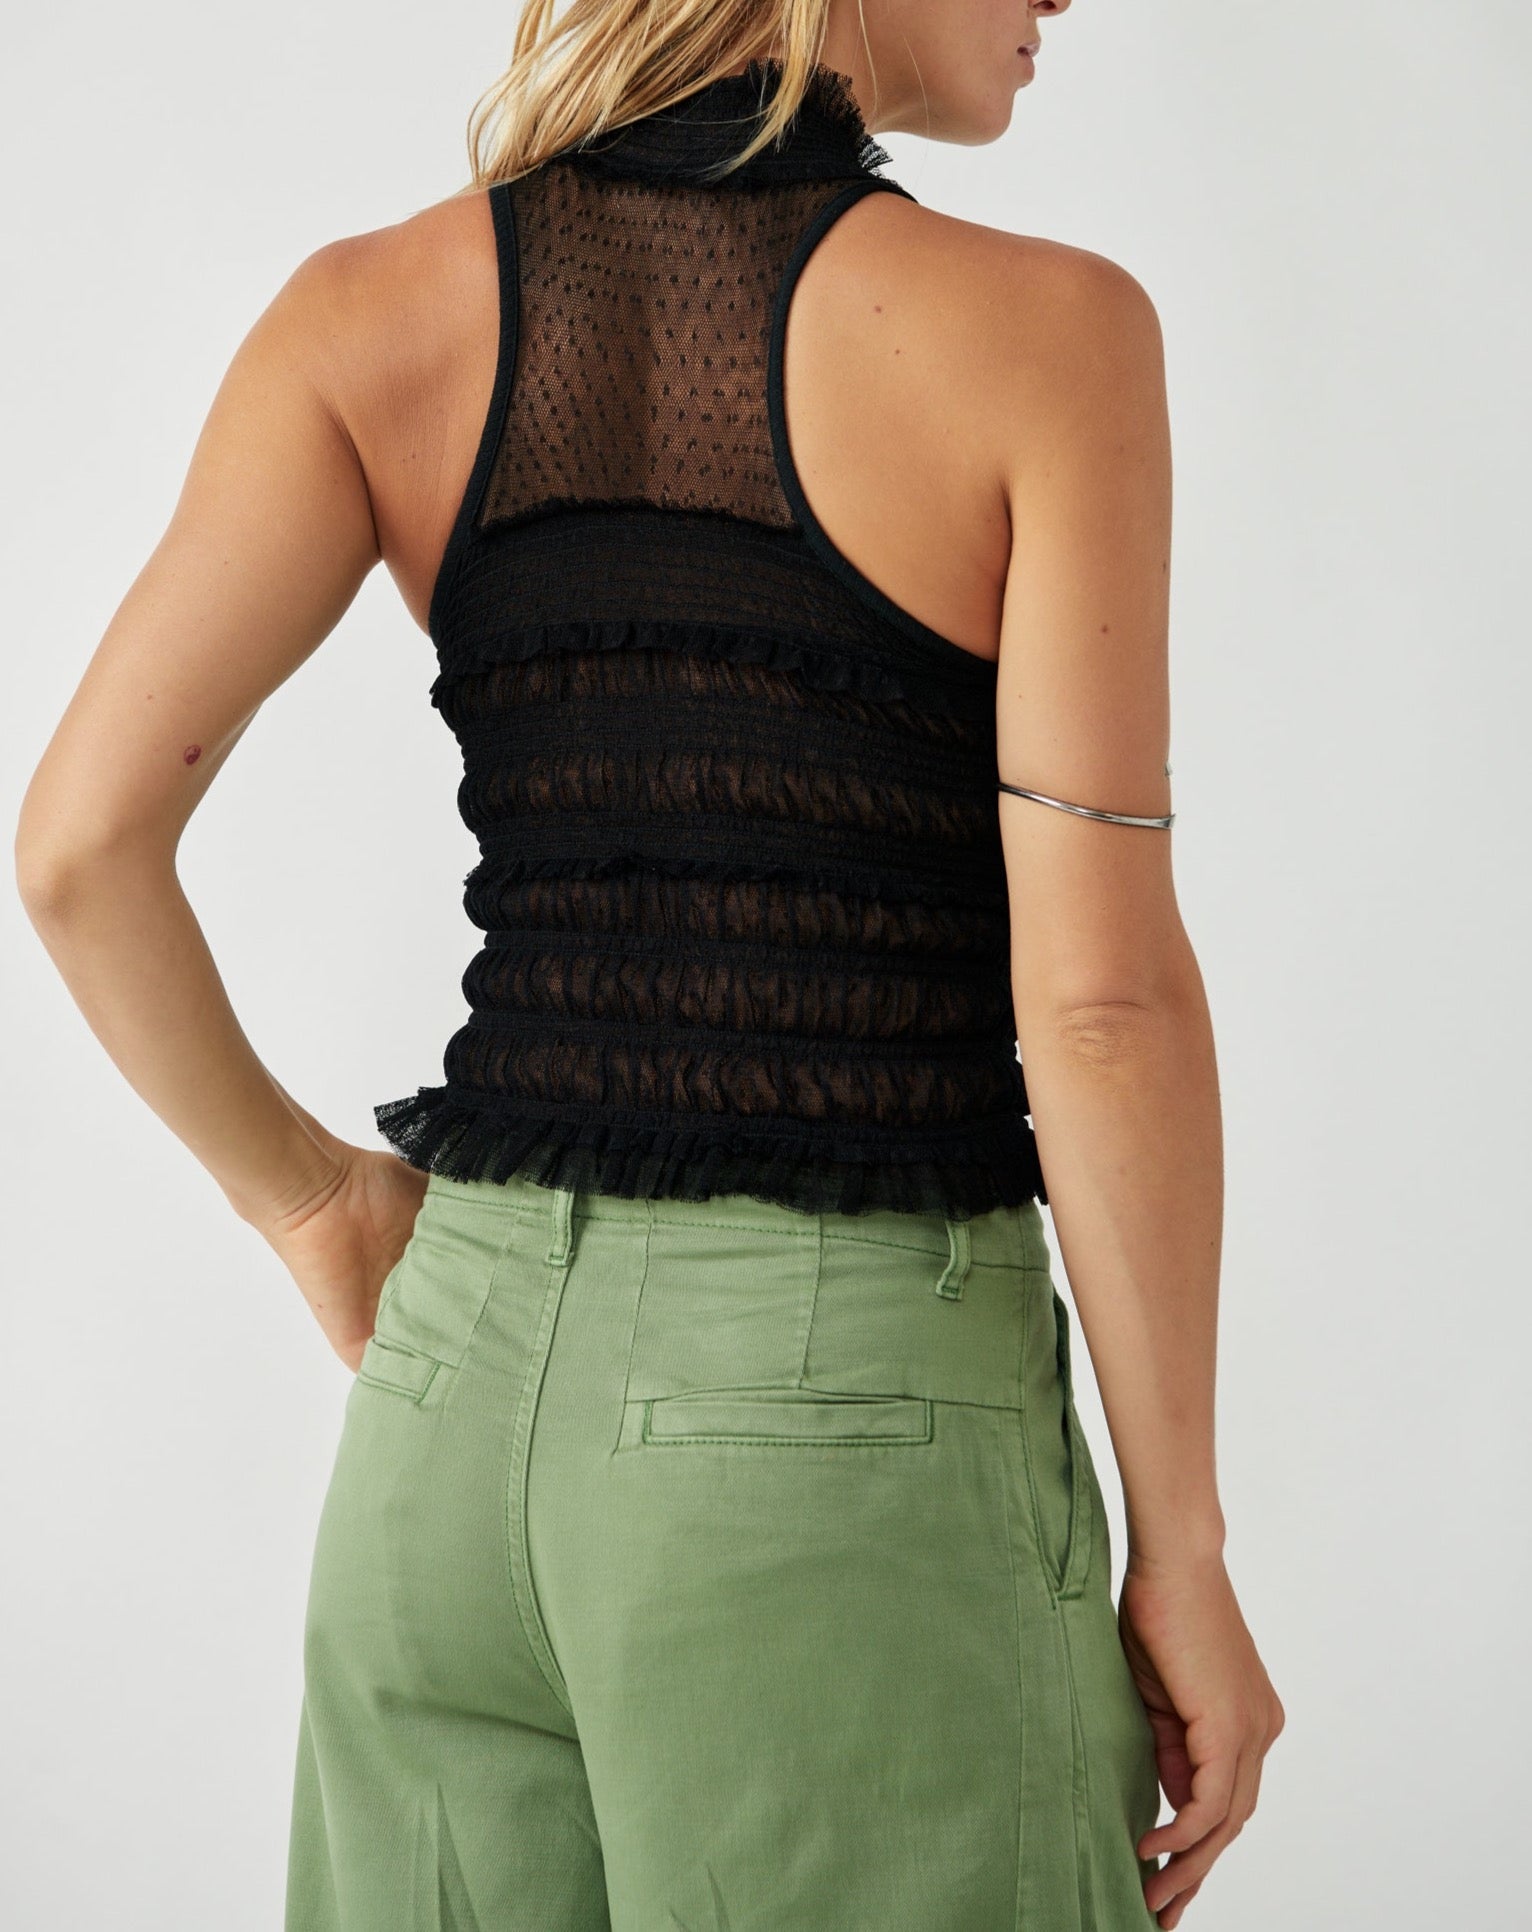 Clementine Top Free People